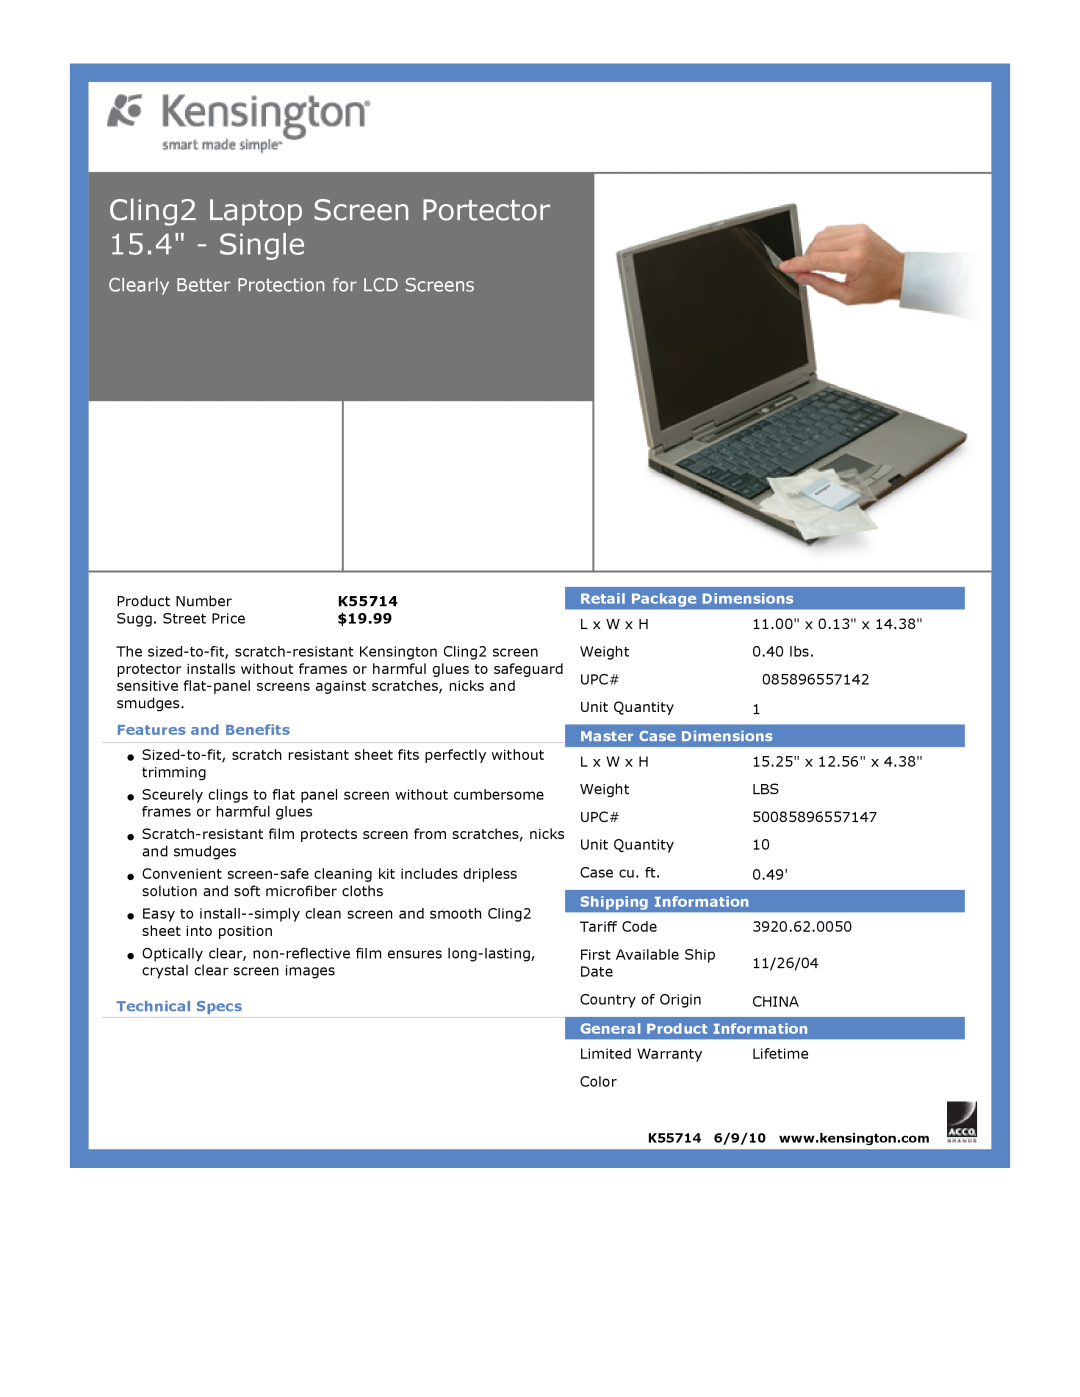 Kensington EU64325 Cling2 Laptop Screen Portector 15.4 - Single, Clearly Better Protection for LCD Screens, $19.99 